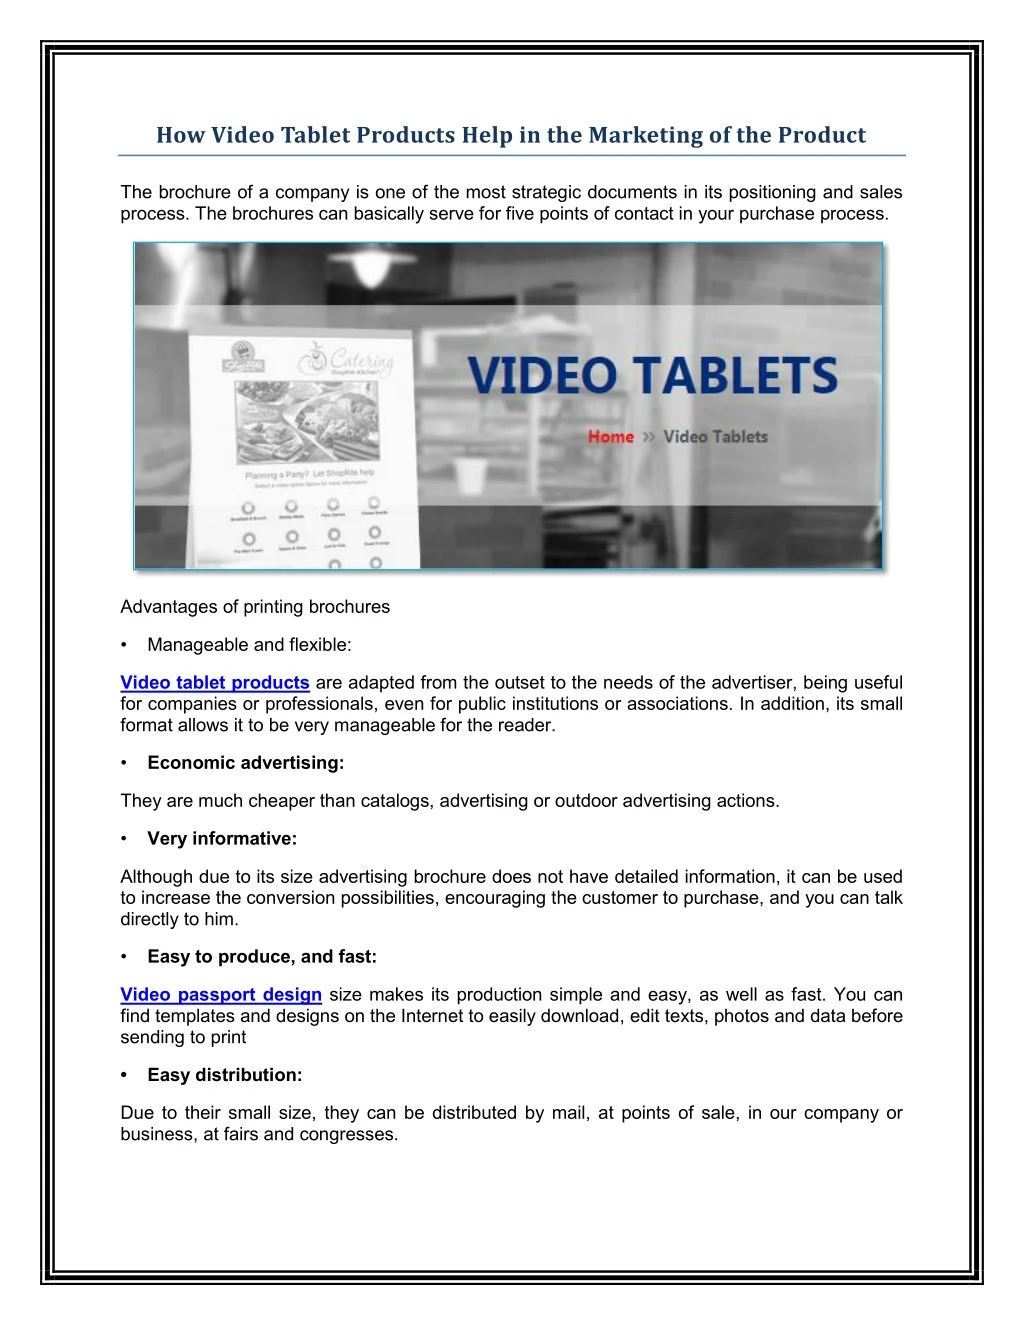 how video tablet products help in the marketing